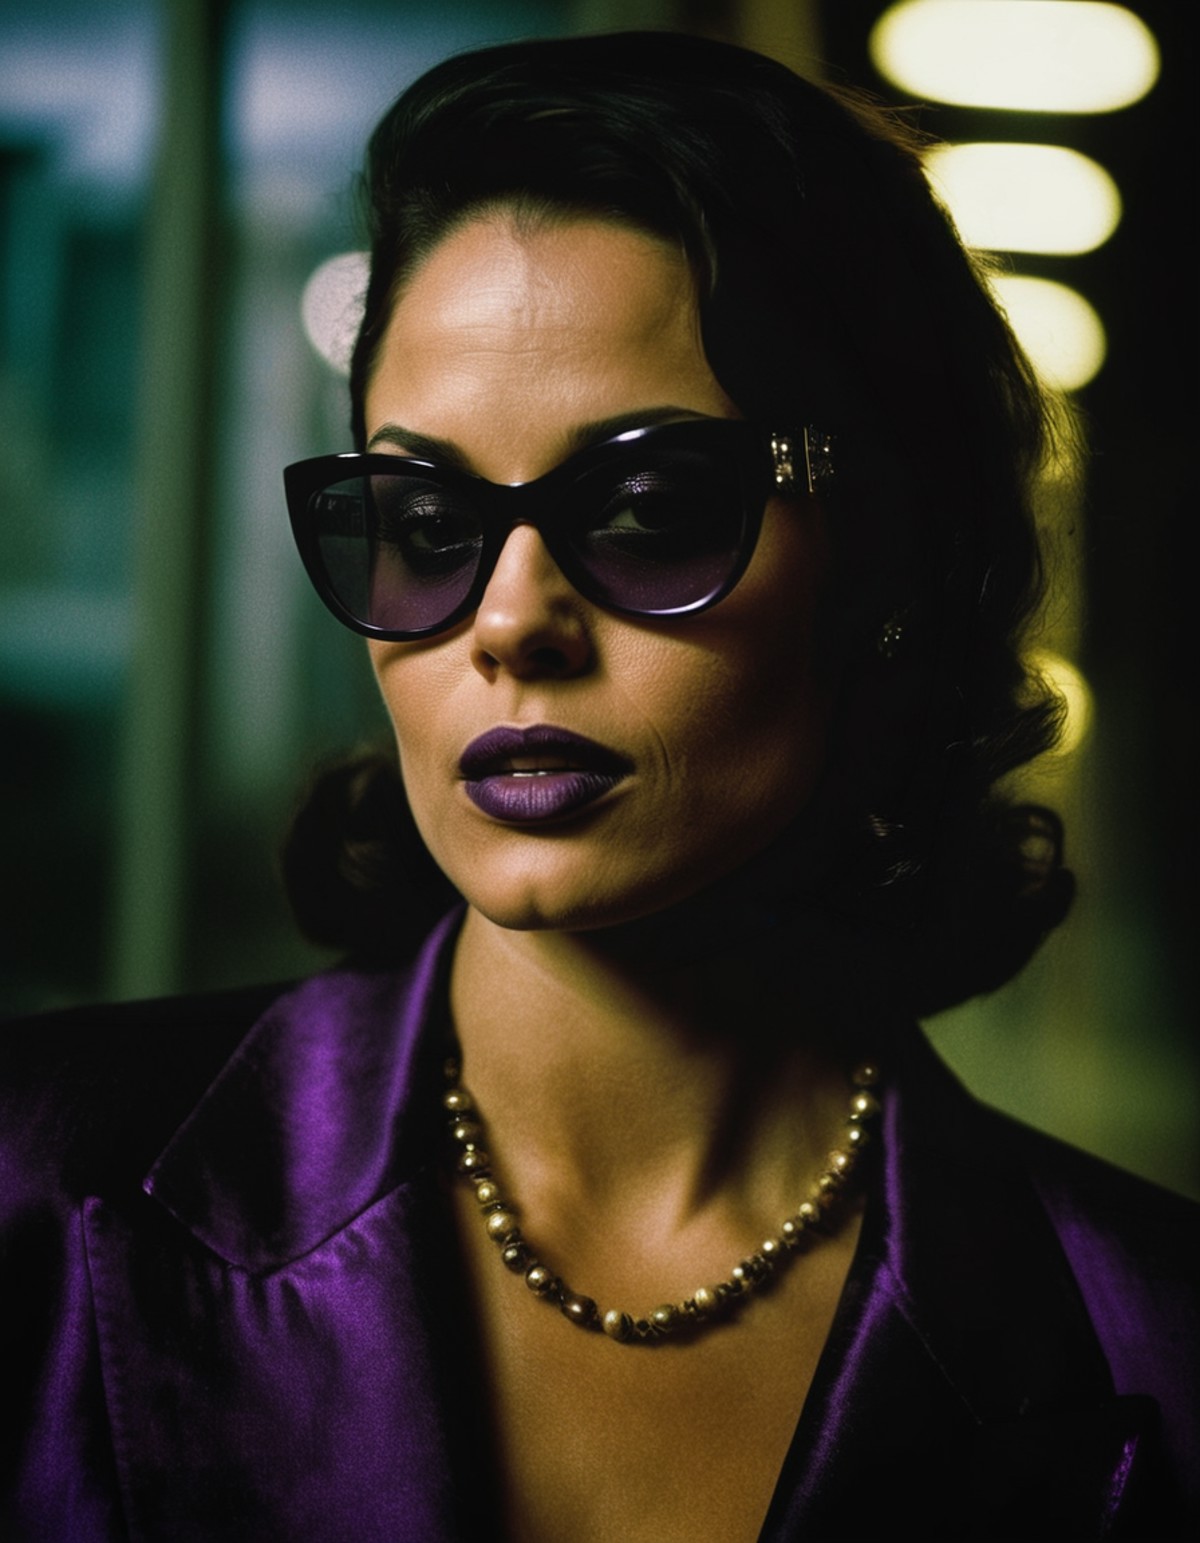 photo of a woman, movie still, film grain, cinematic, inspired by Saints Row